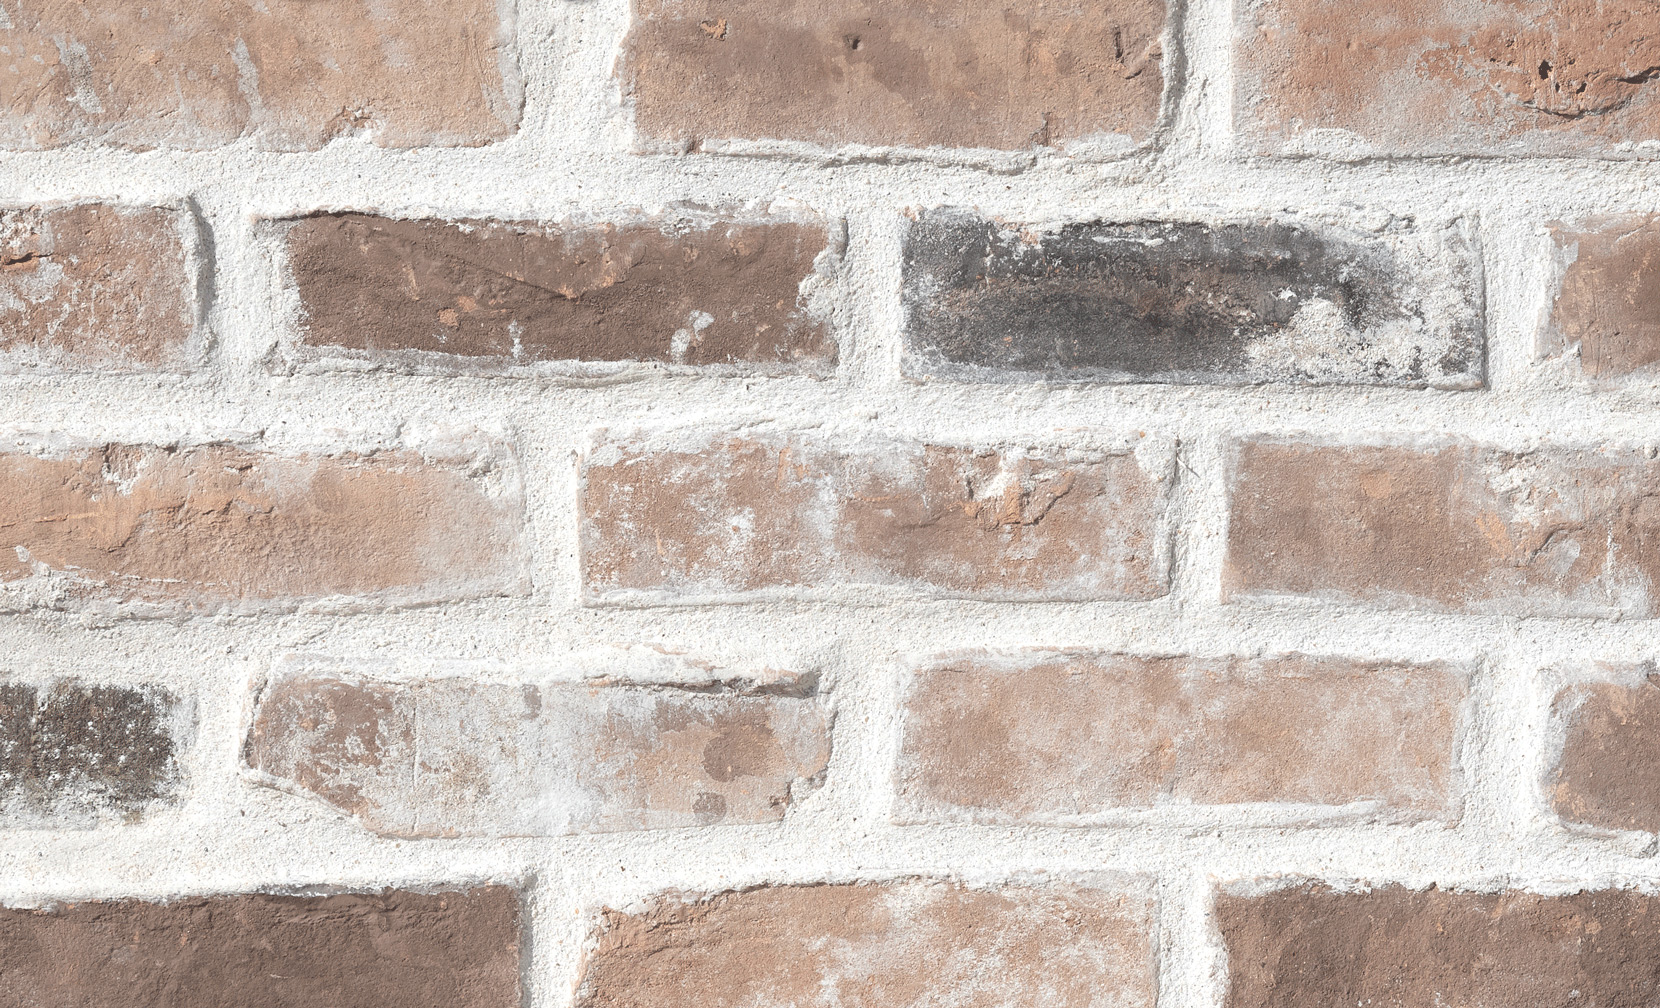 Leading Supplier of Antique Brick, Manufactured Brick and Natural Stone